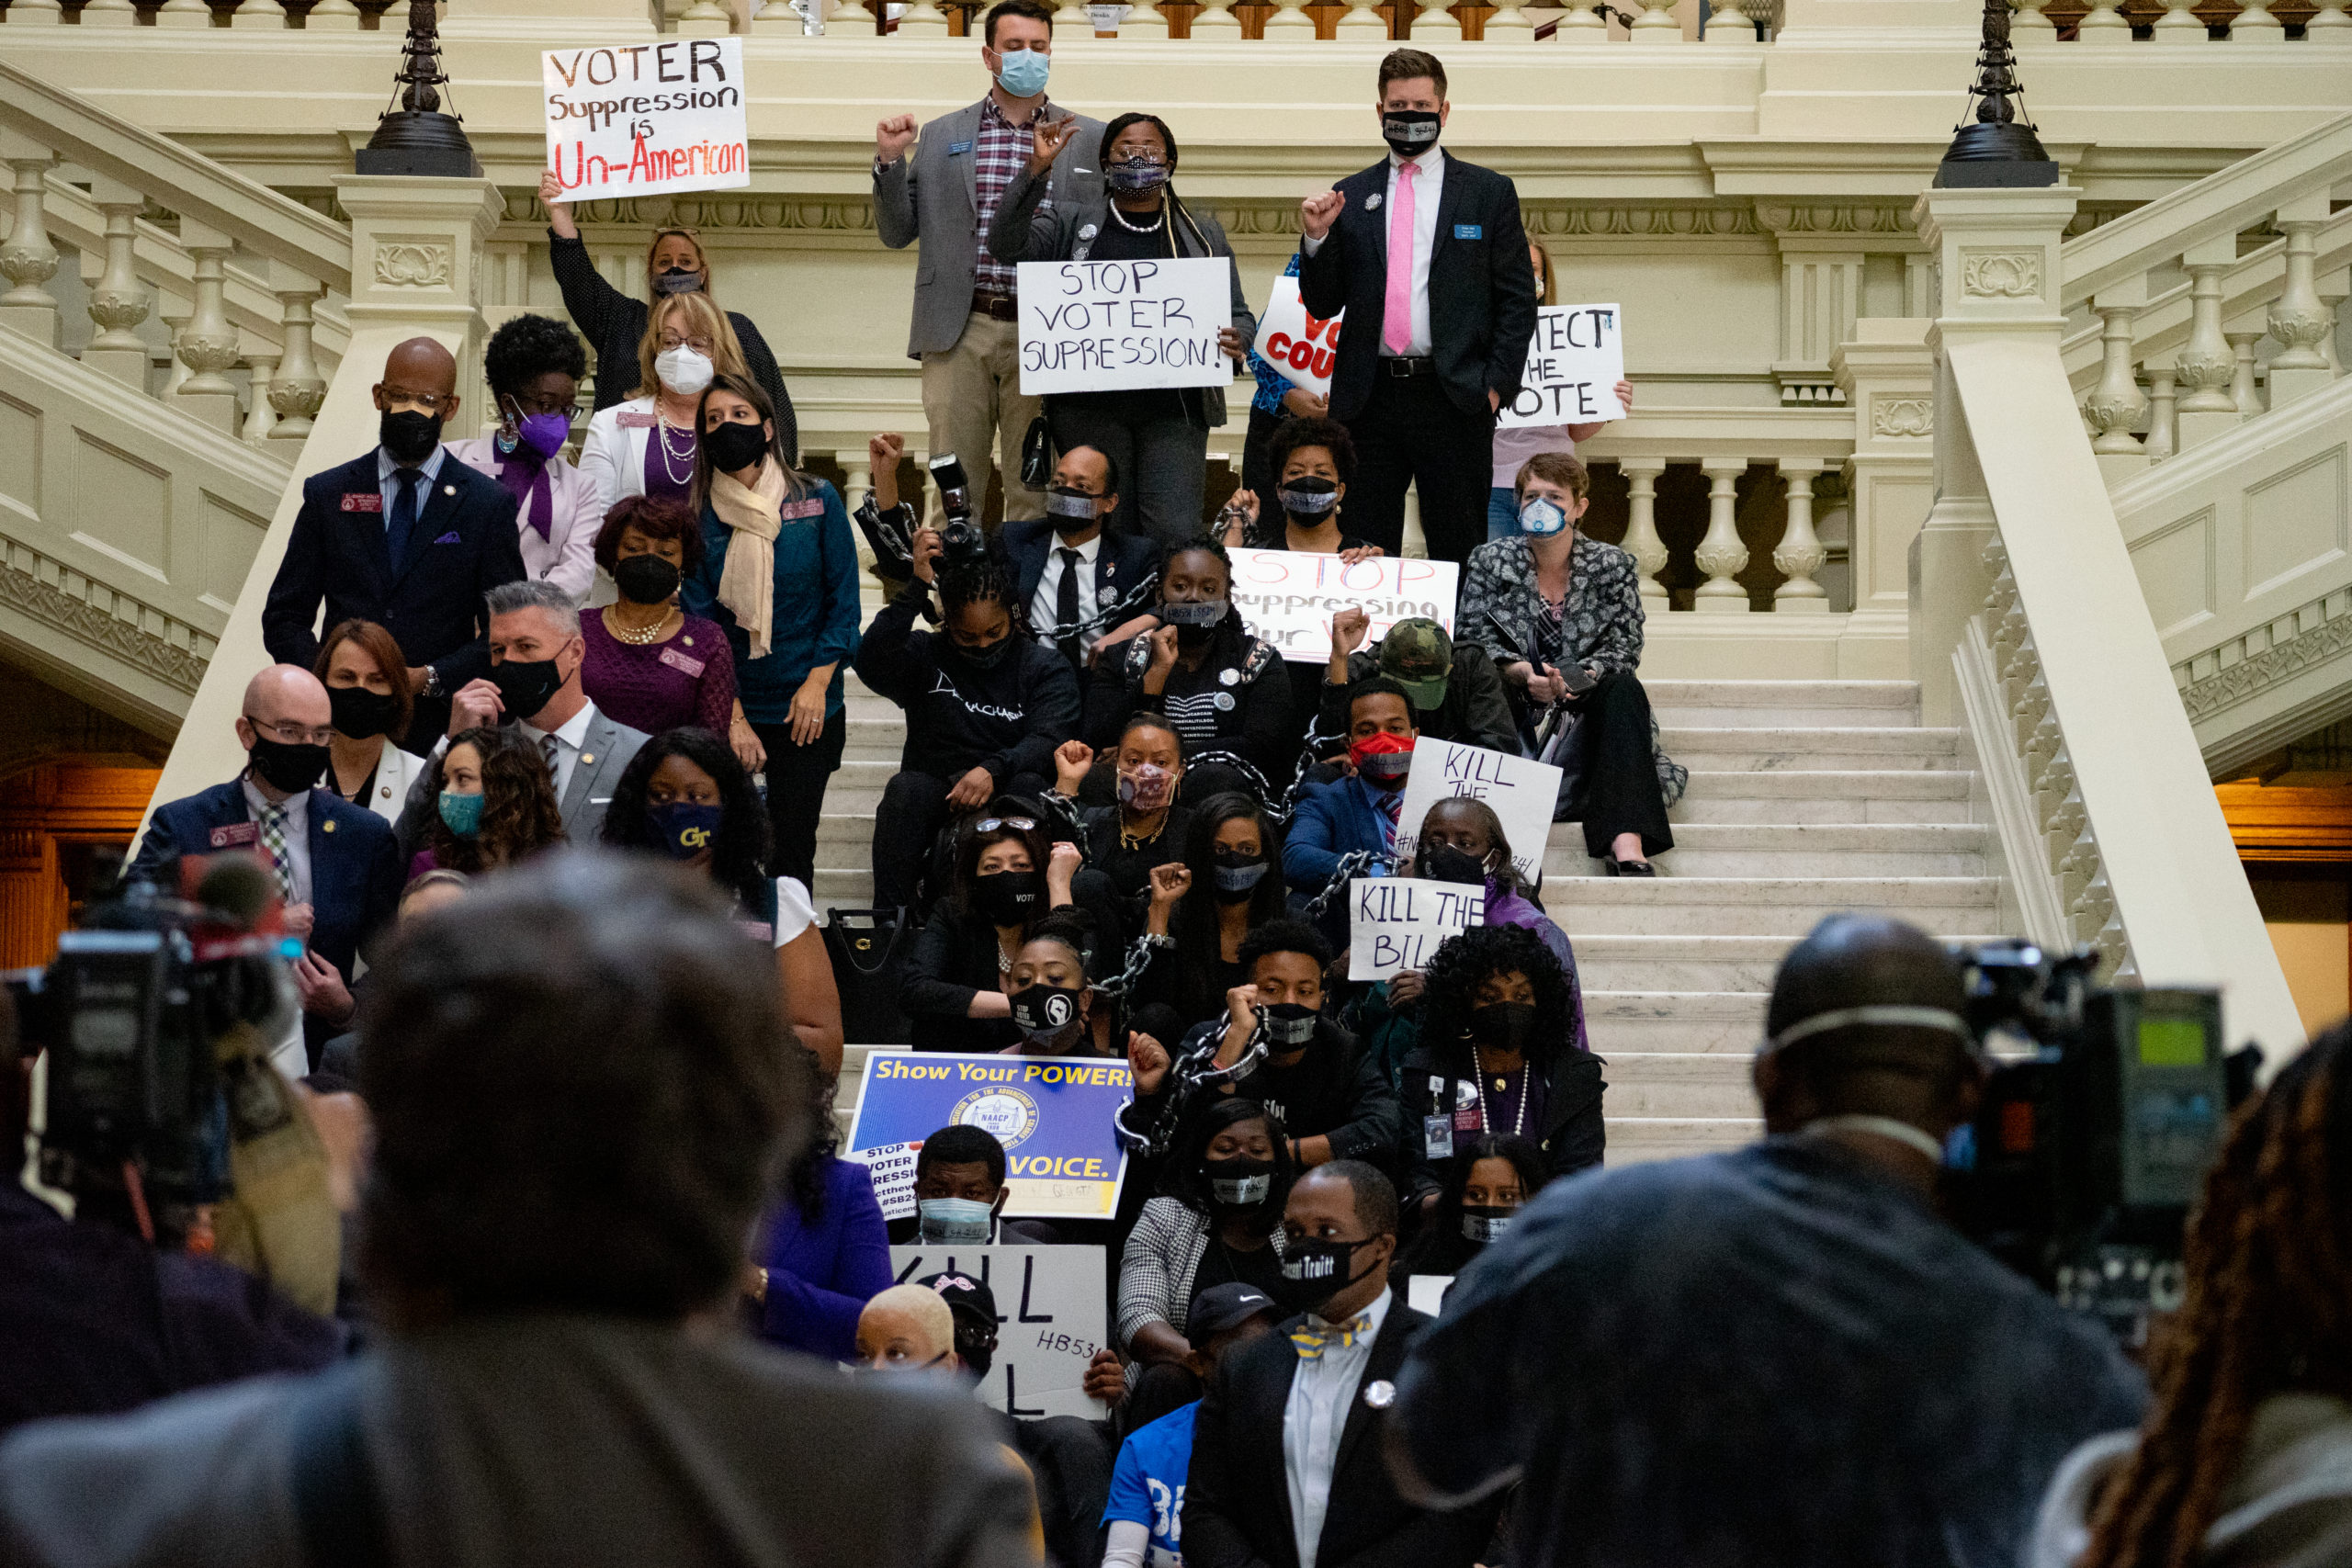 Demonstrators hold a sit-in inside of Georgia Capitol building in opposition of a Republican bill that would restrict early voting hours, remove drop boxes, and require the use of a government ID when voting by mail. (Photo by Megan Varner/Getty Images)